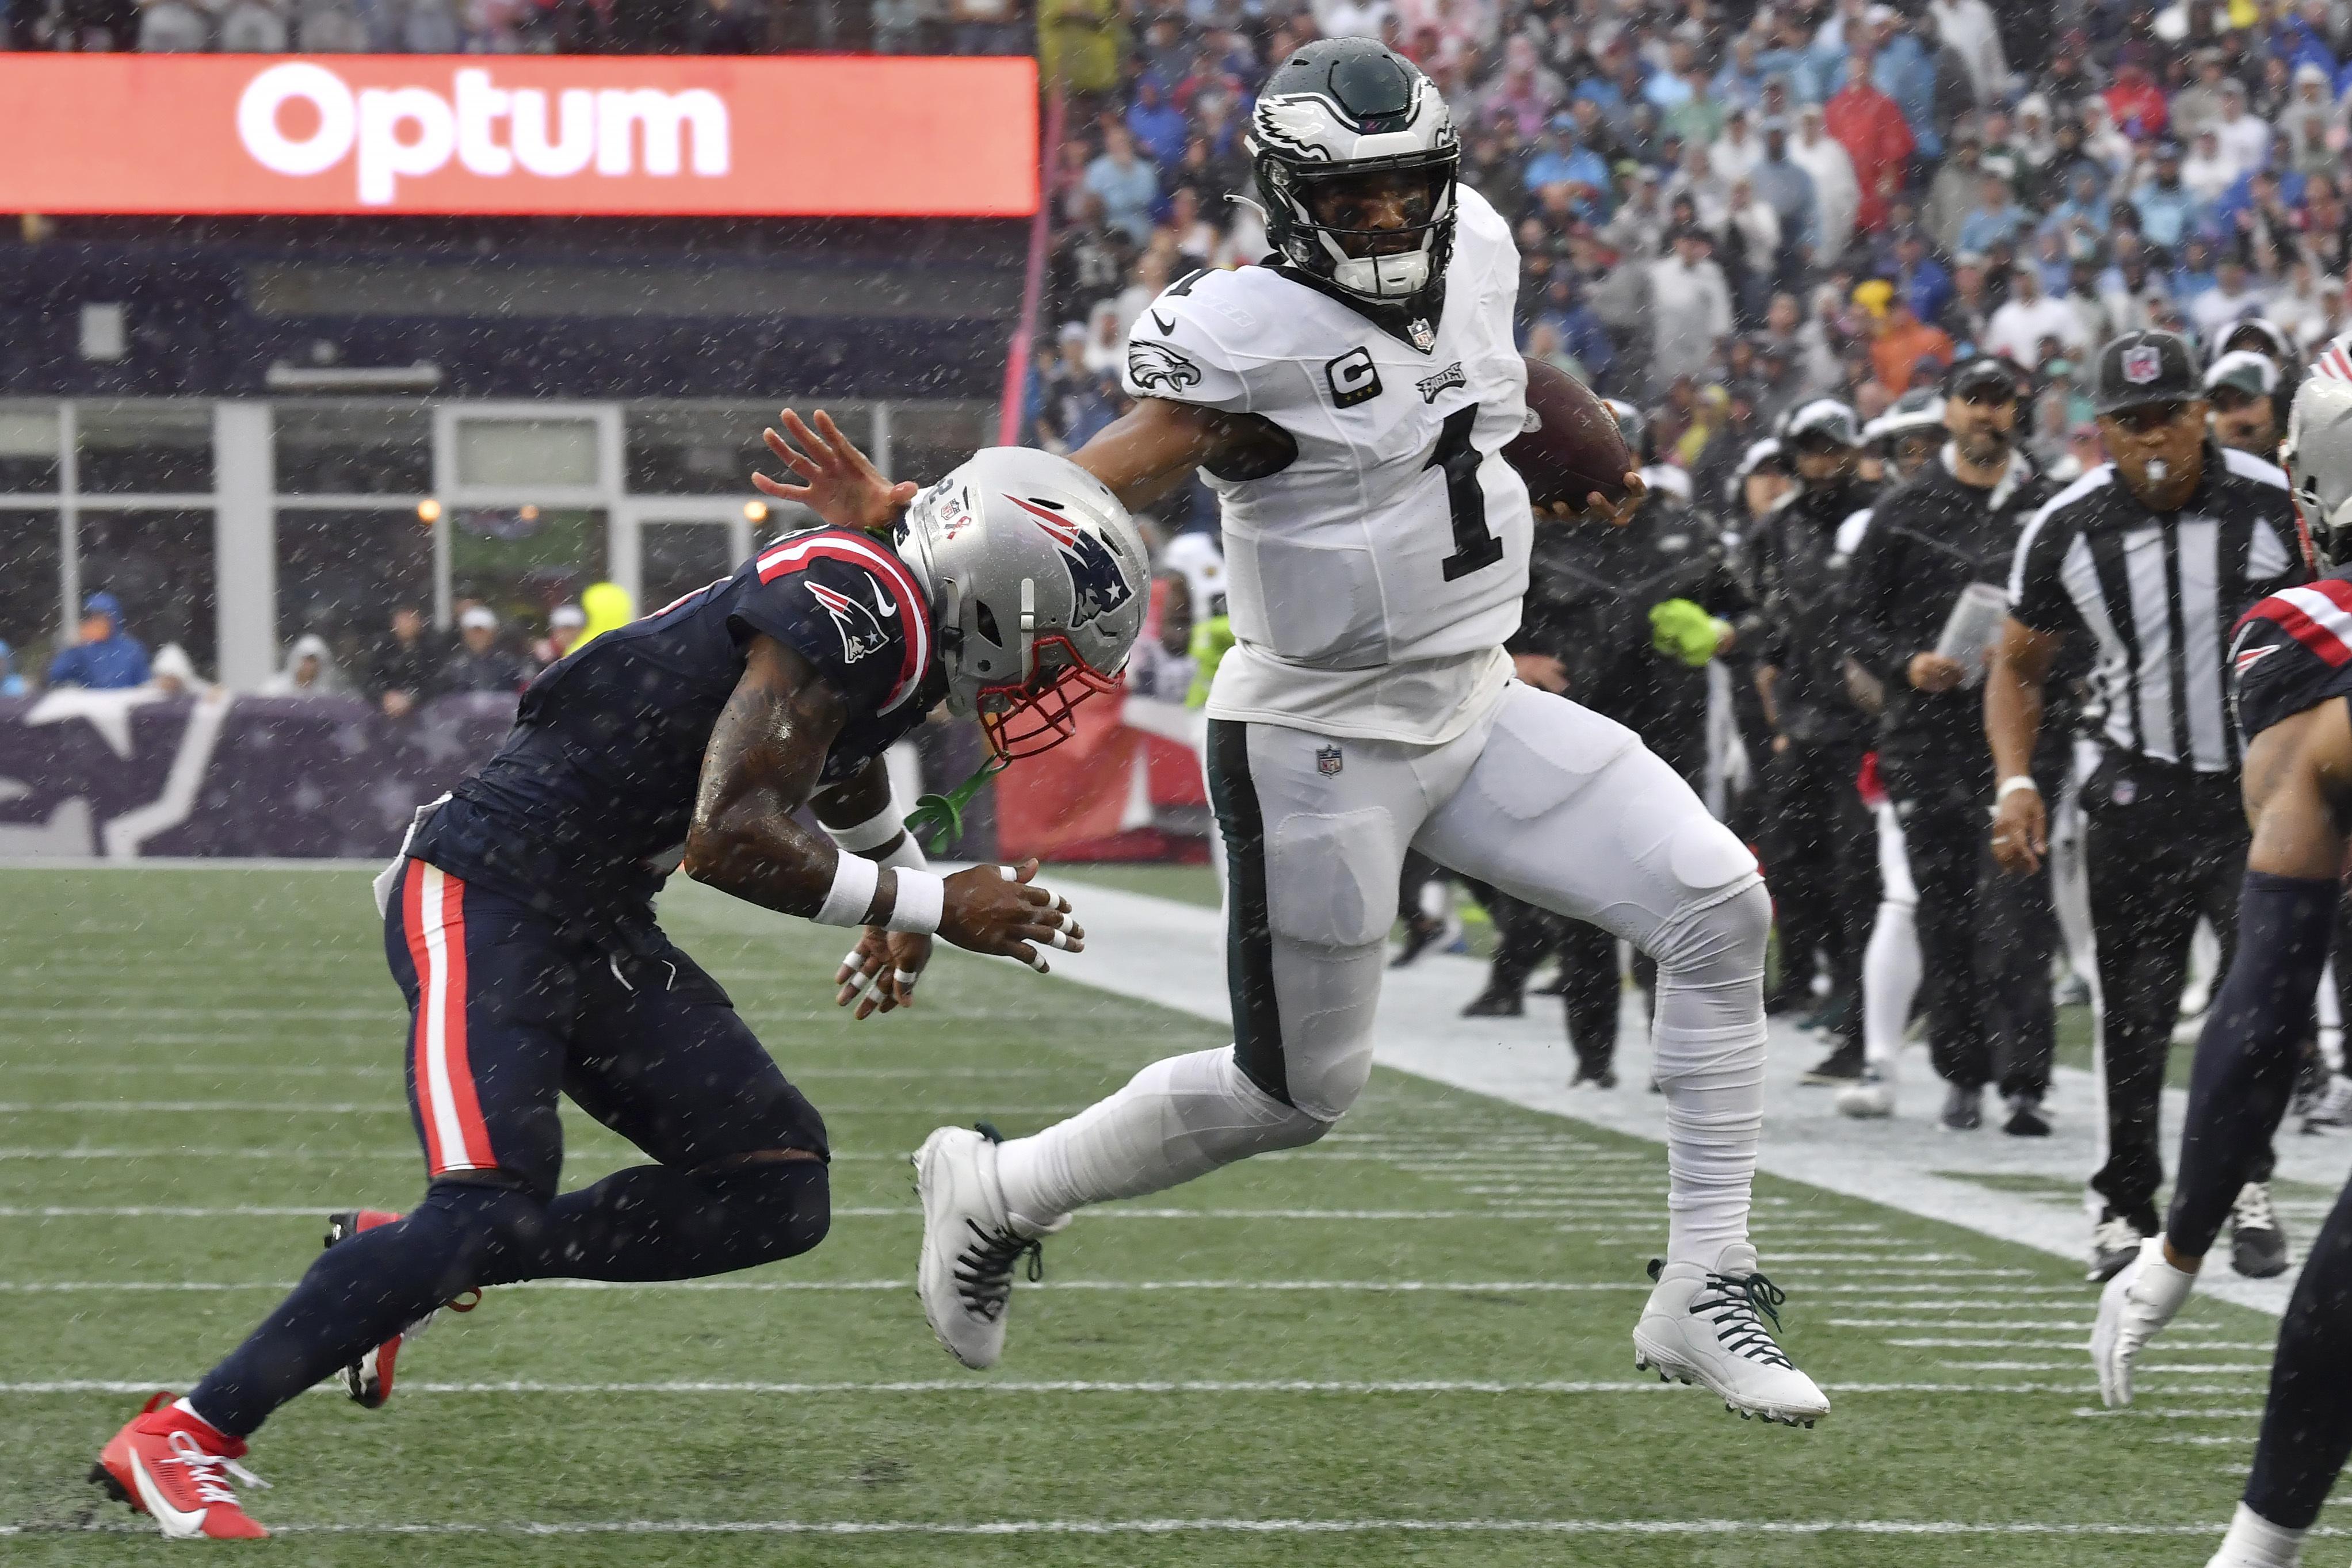 Hurts returns from injury, leads Eagles to No. 1 seed in NFC – Delco Times